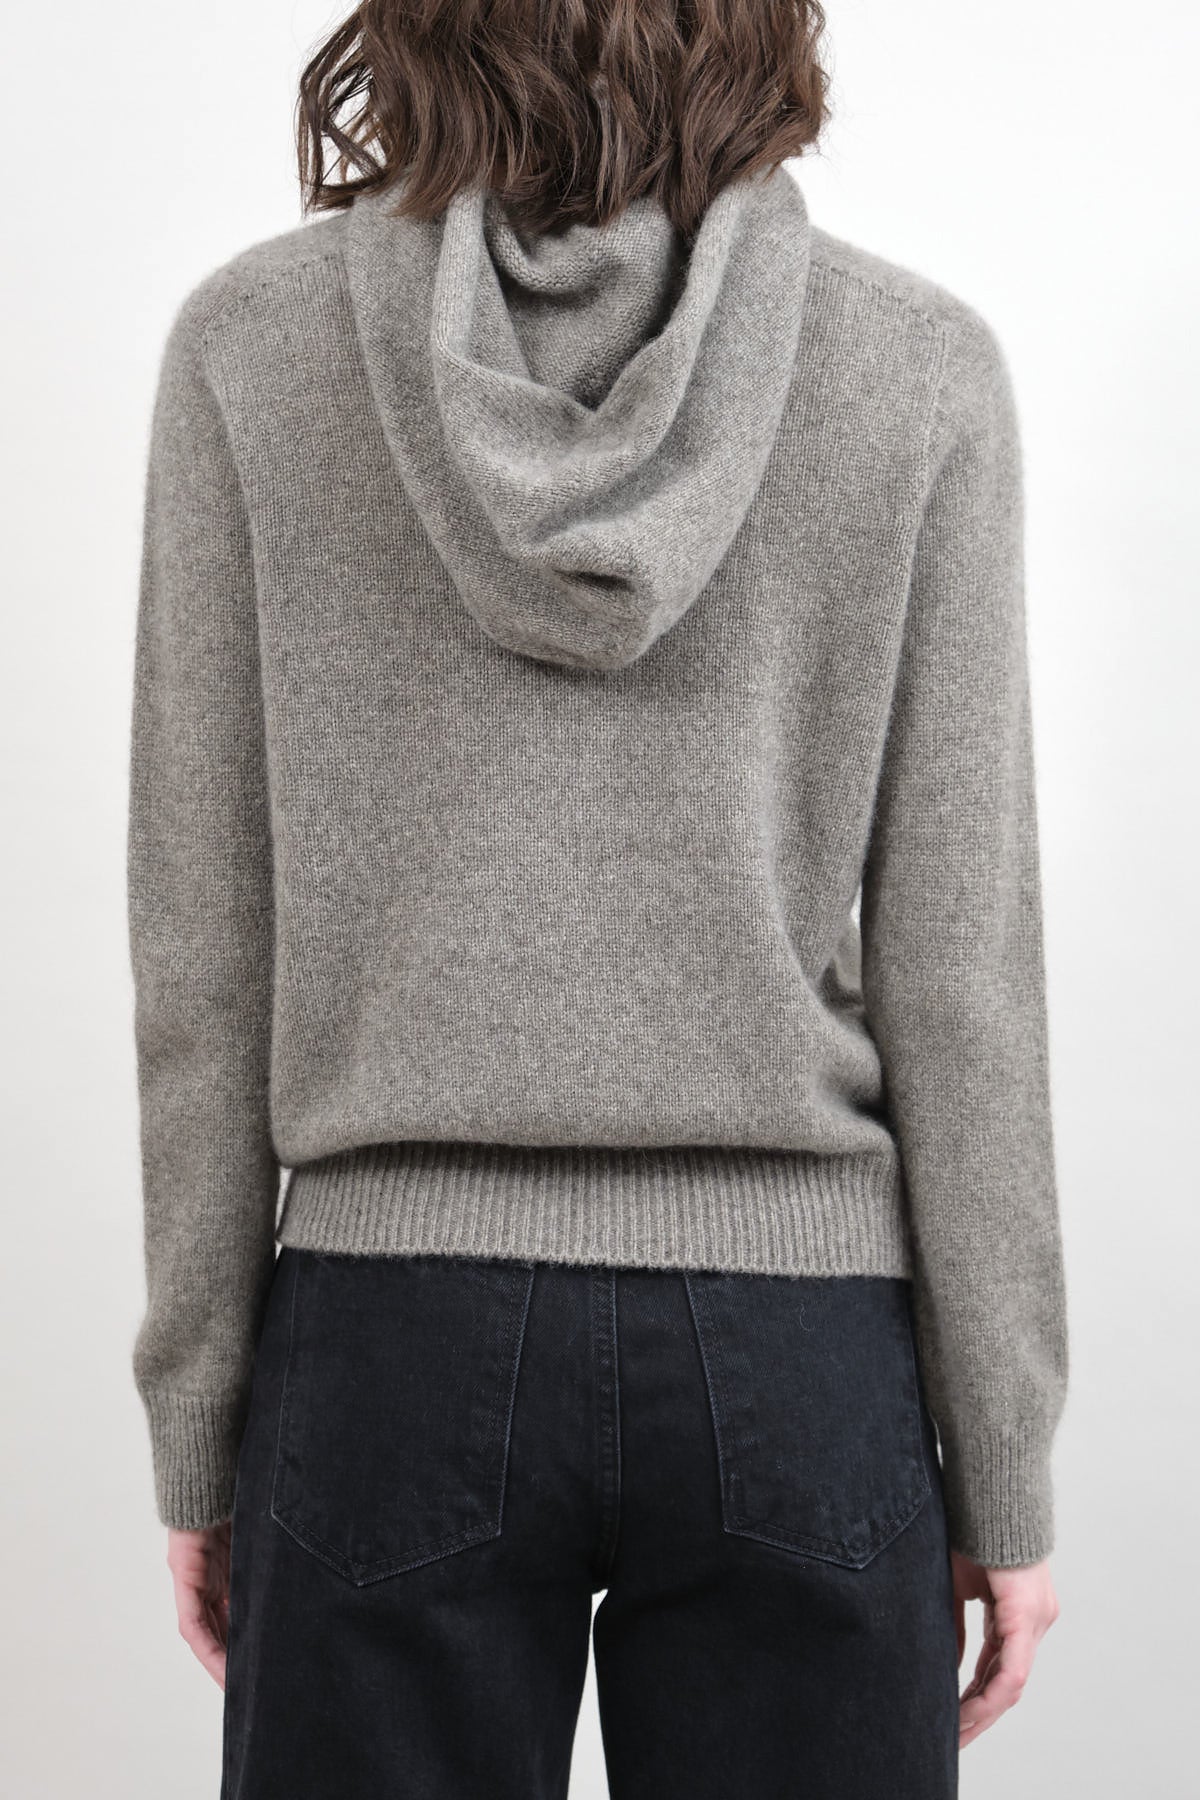 luxury cashmere from japan.